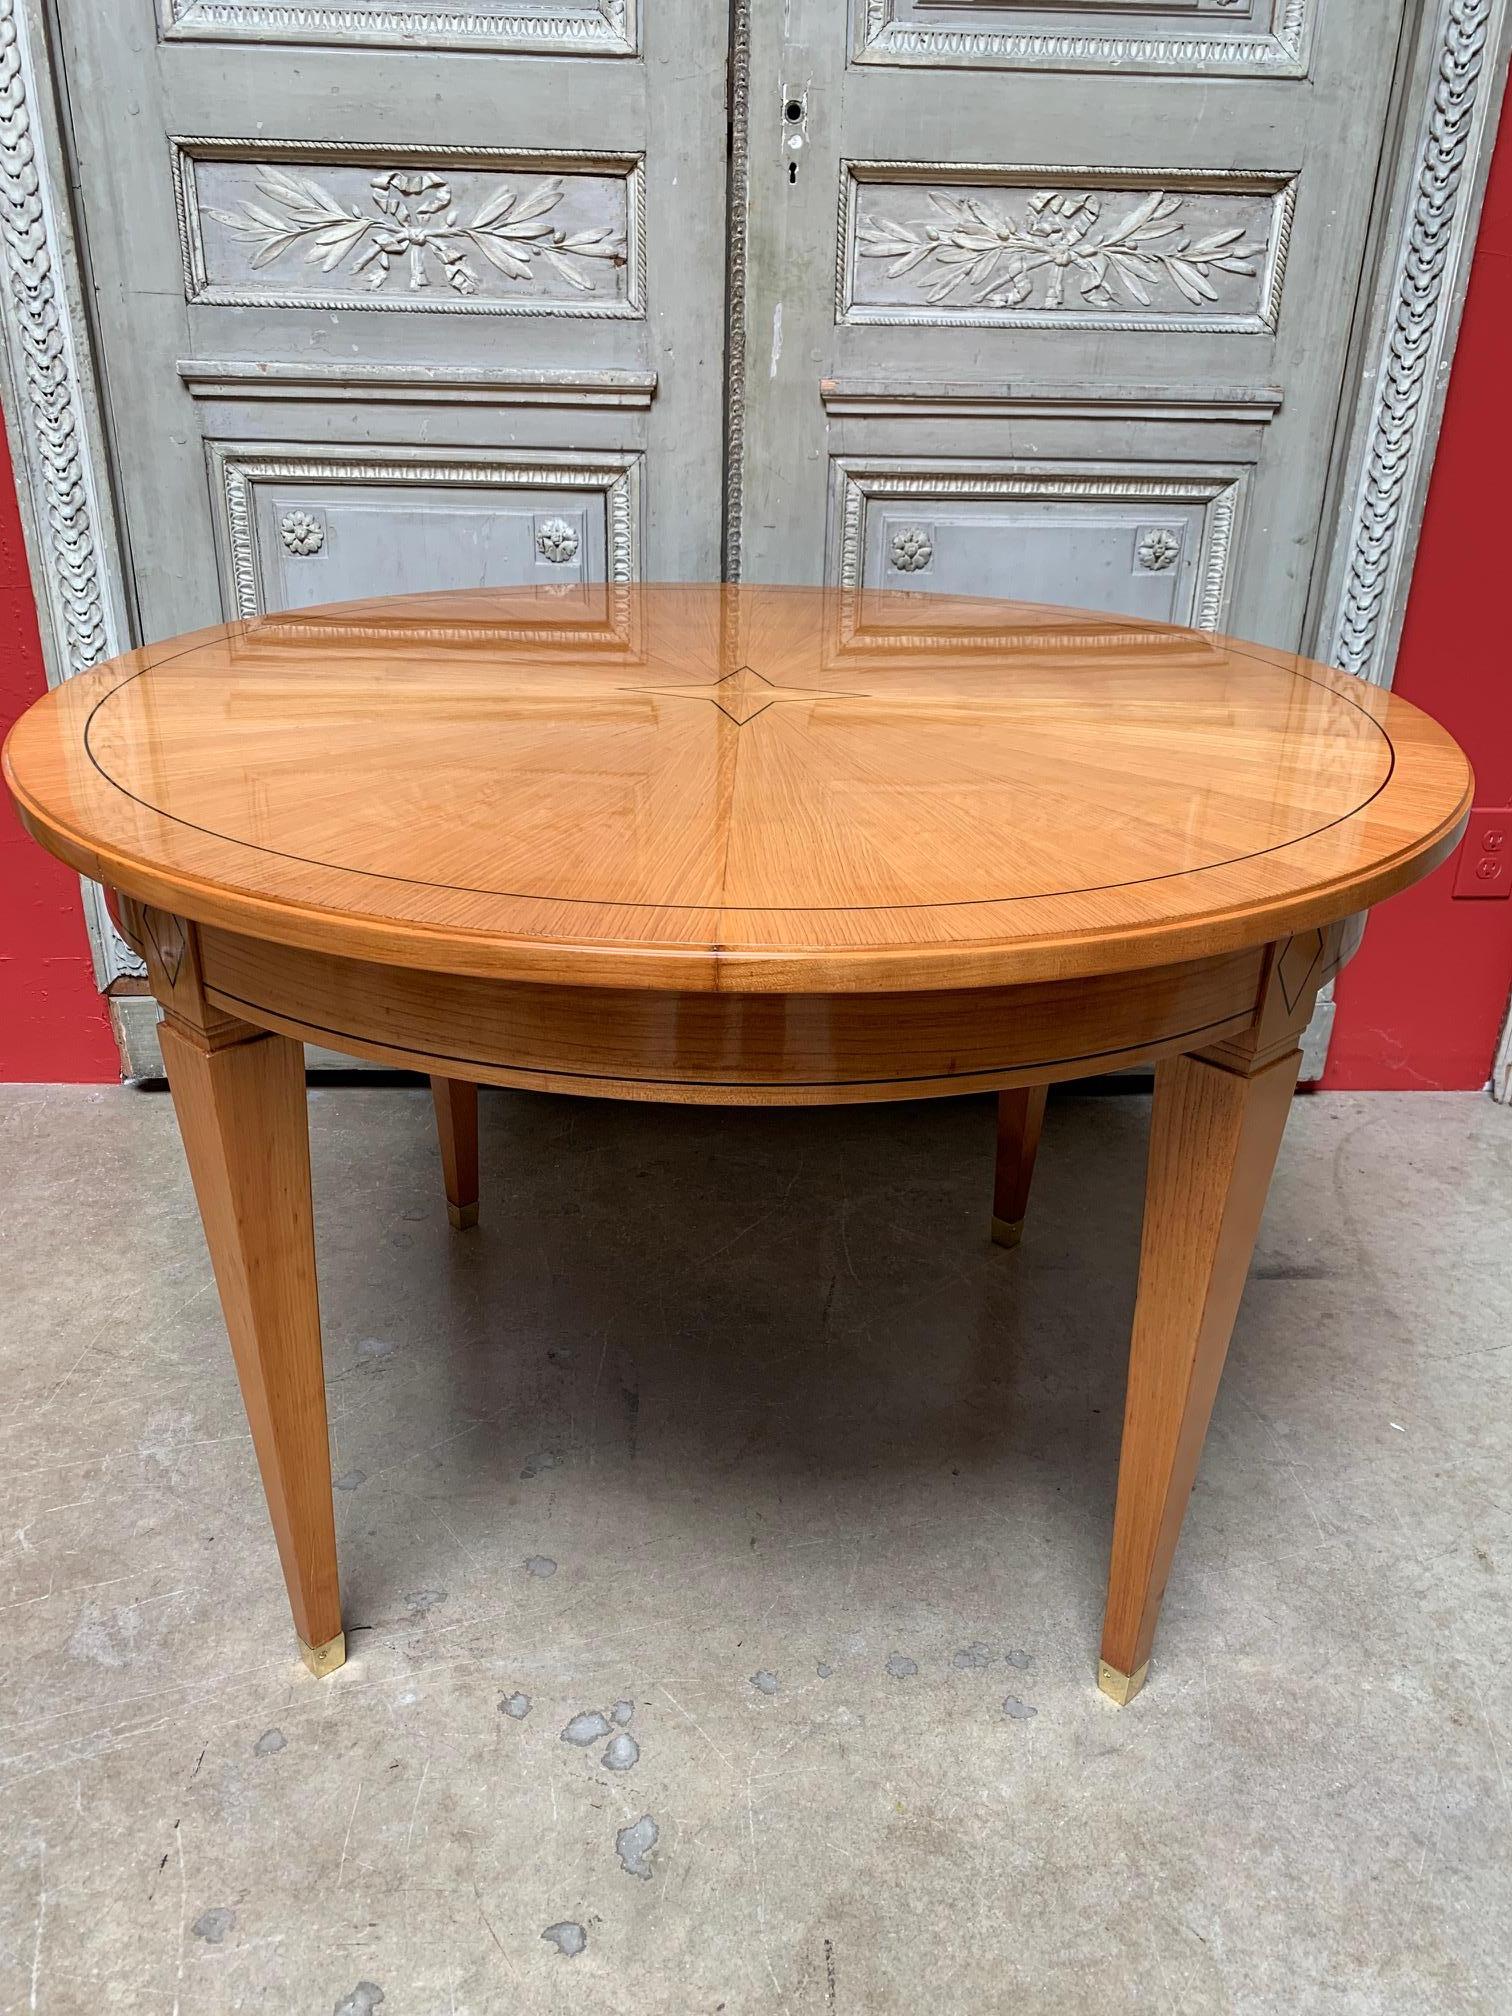 French Directoire style mahogany veneered table with a parquetry inlay from the 1920s. This table has four square tapering legs, ending with a squire tapering bronze sabot. The parquetry is a contrasting color to the golden mahogany of the table.